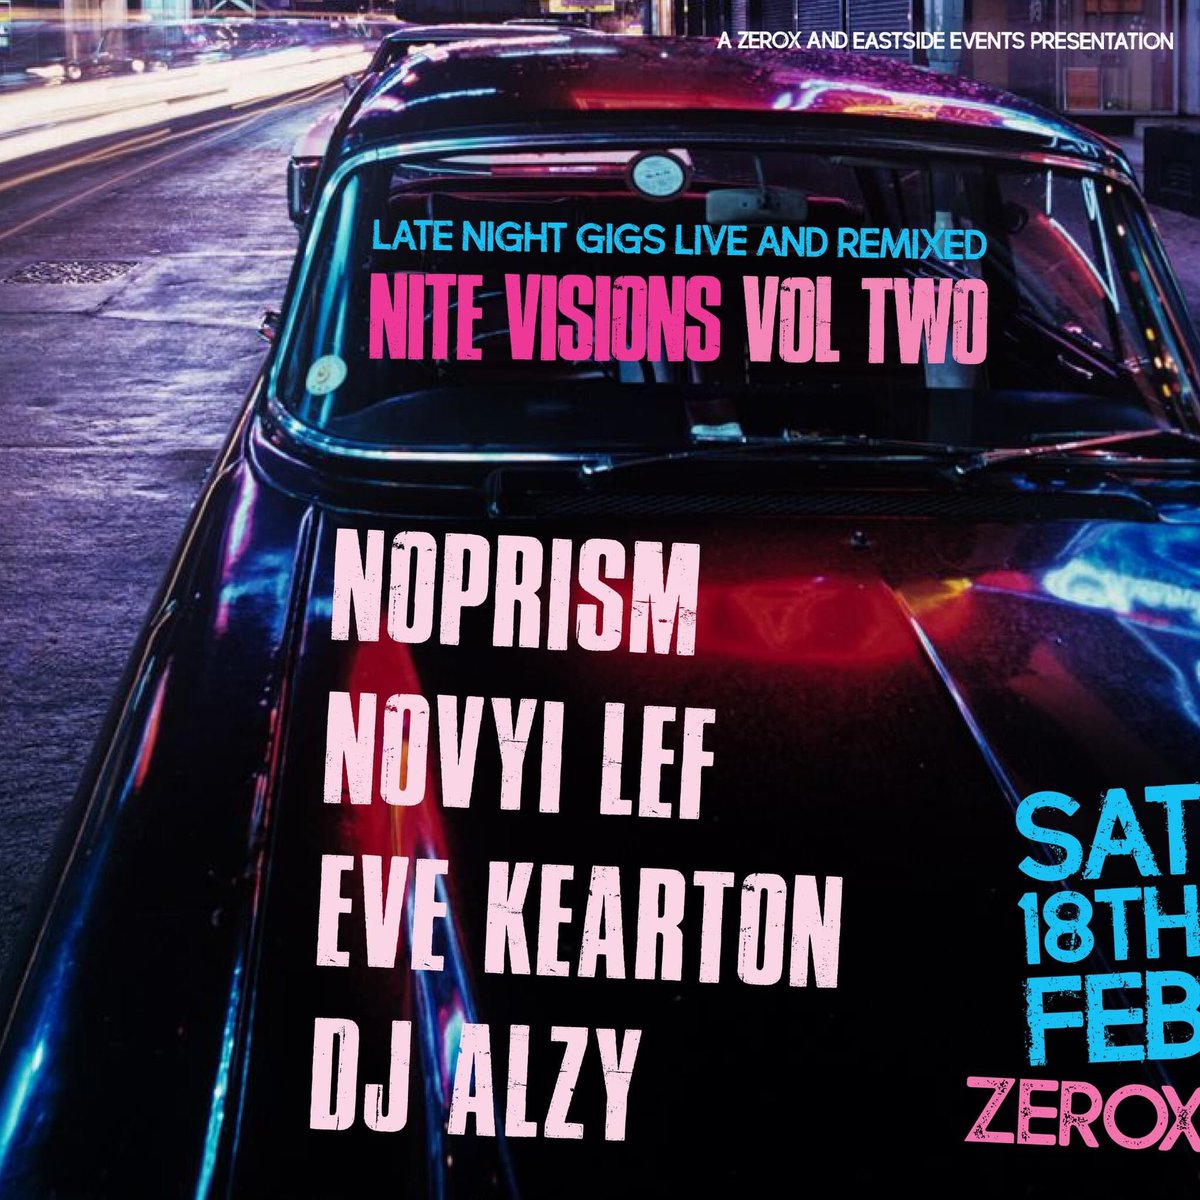 We are BACK!! Kicking off 2023 in style with Nite Visions vol 2 at ZEROX, w/ @thisisnoprism, Eve Kearton & DJ Alzy! We were gutted to miss the first one, so we’re excited to put that right. Get your tix here: bit.ly/40908Ap